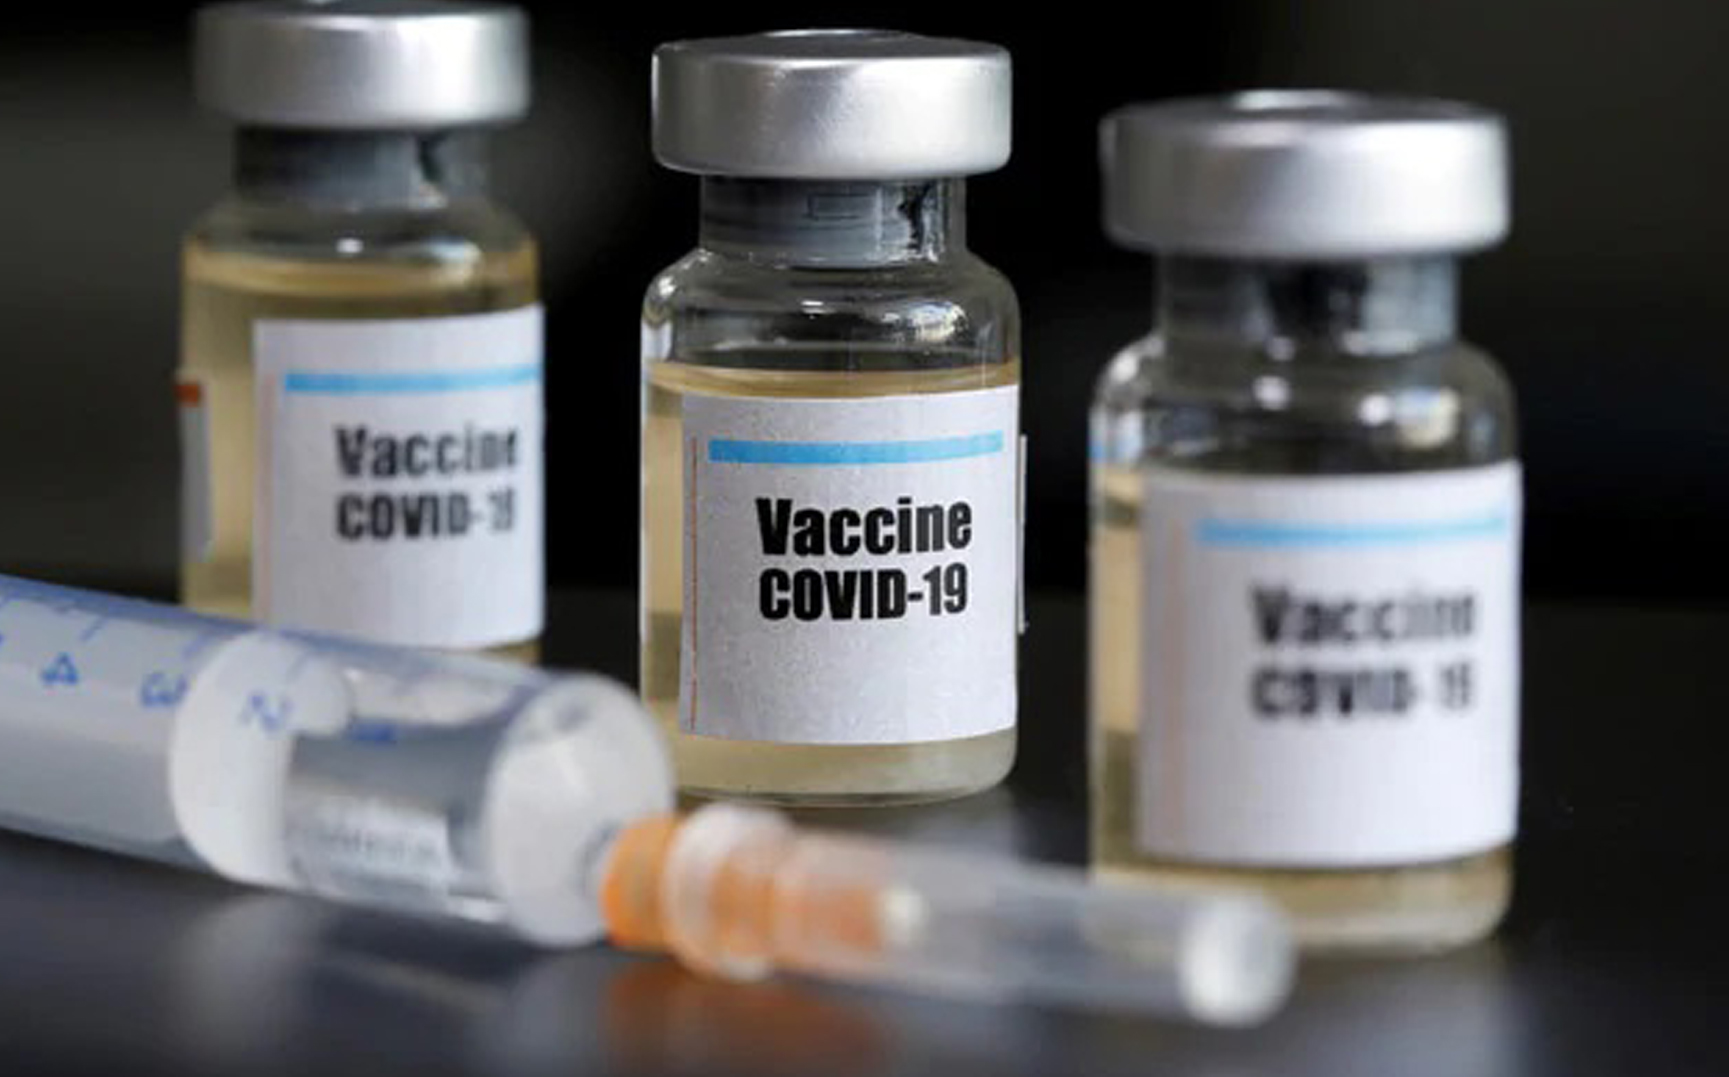 corona vaccine will be available in the first quarter of next year.